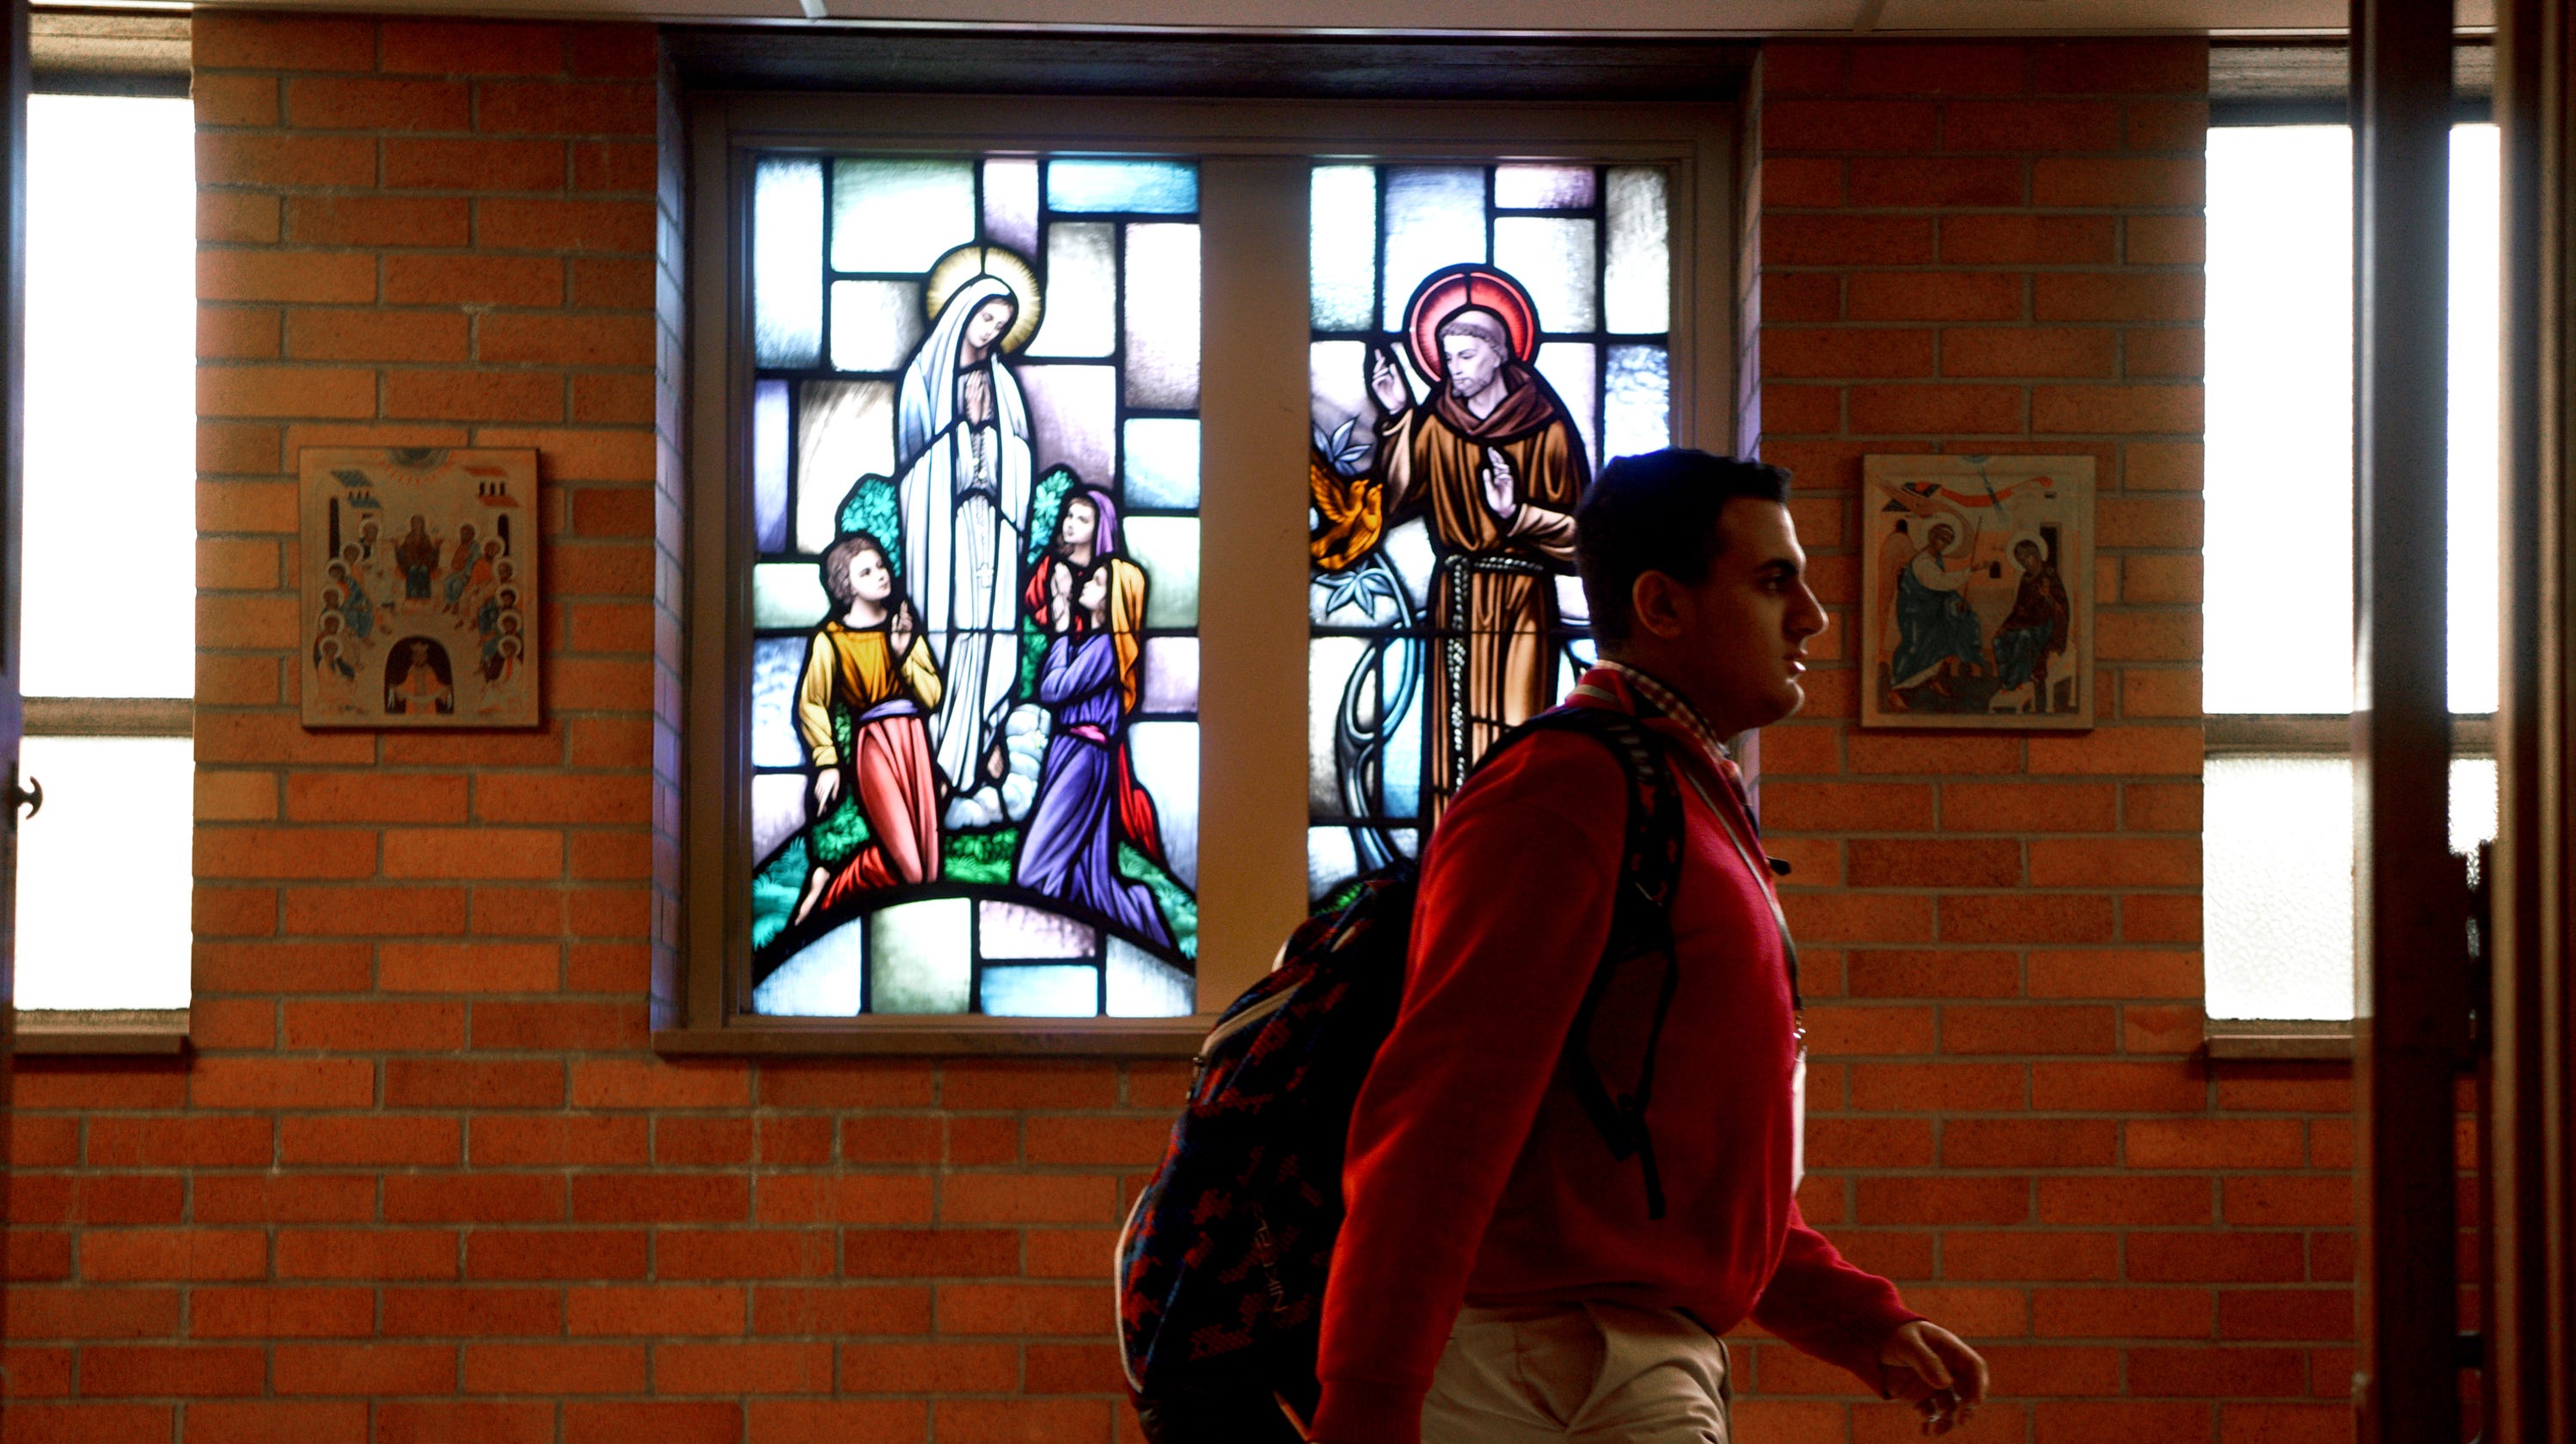 Catholic schools search for creative ways to survive in increasing competitive landscape